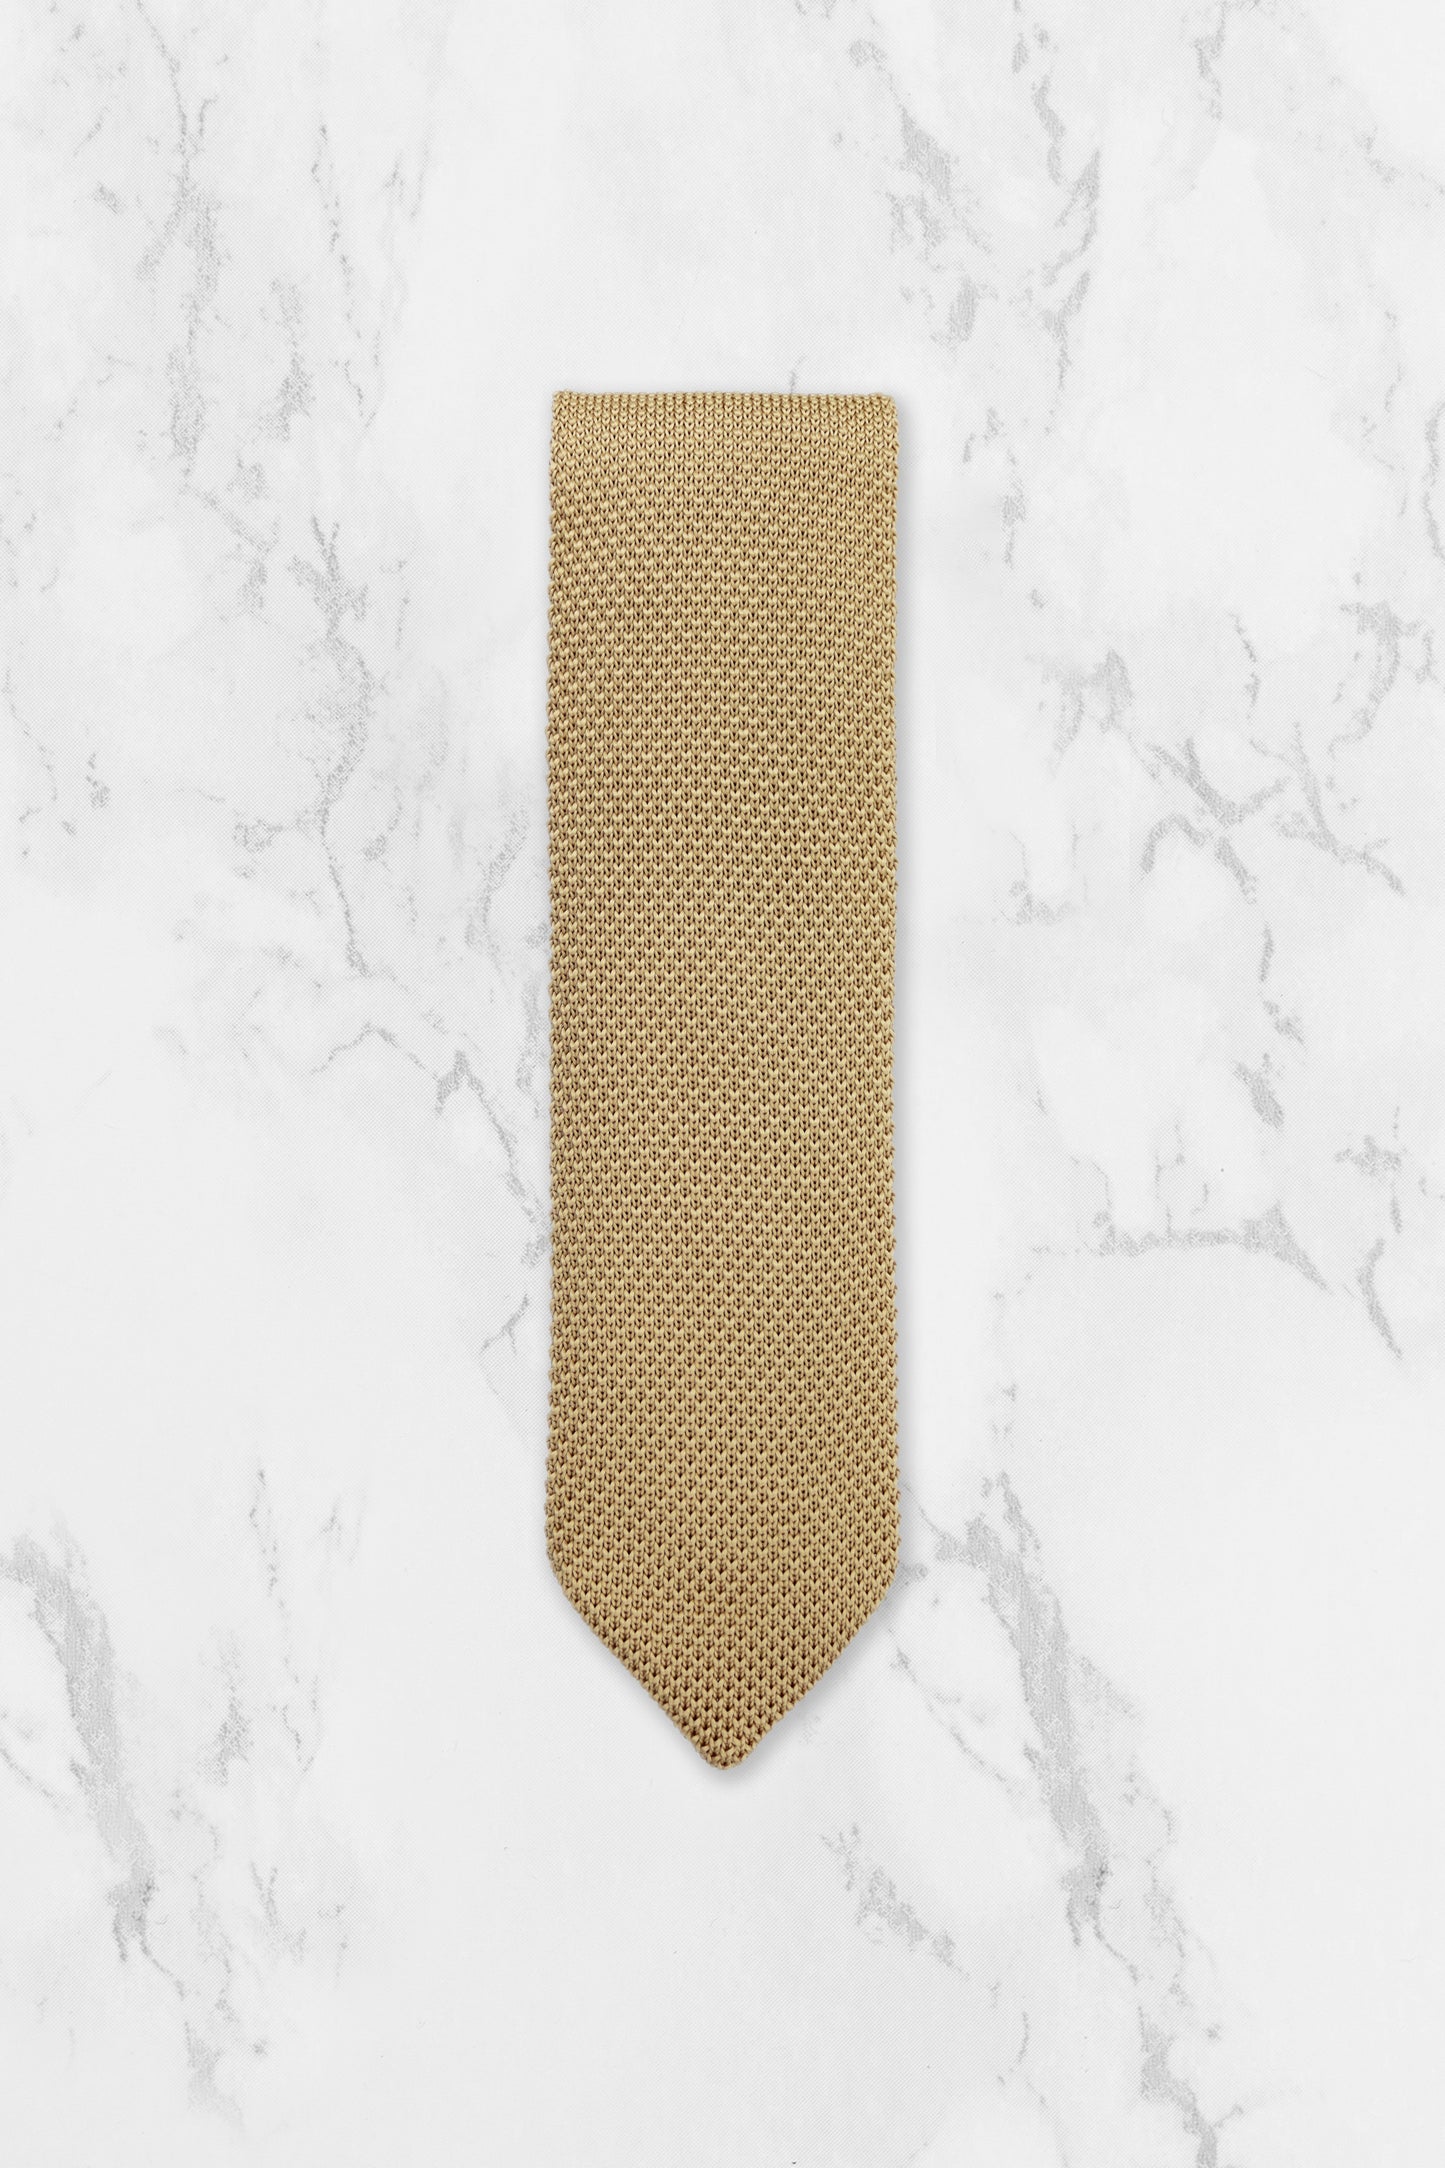 100% Polyester Knitted Bow Tie - Beige